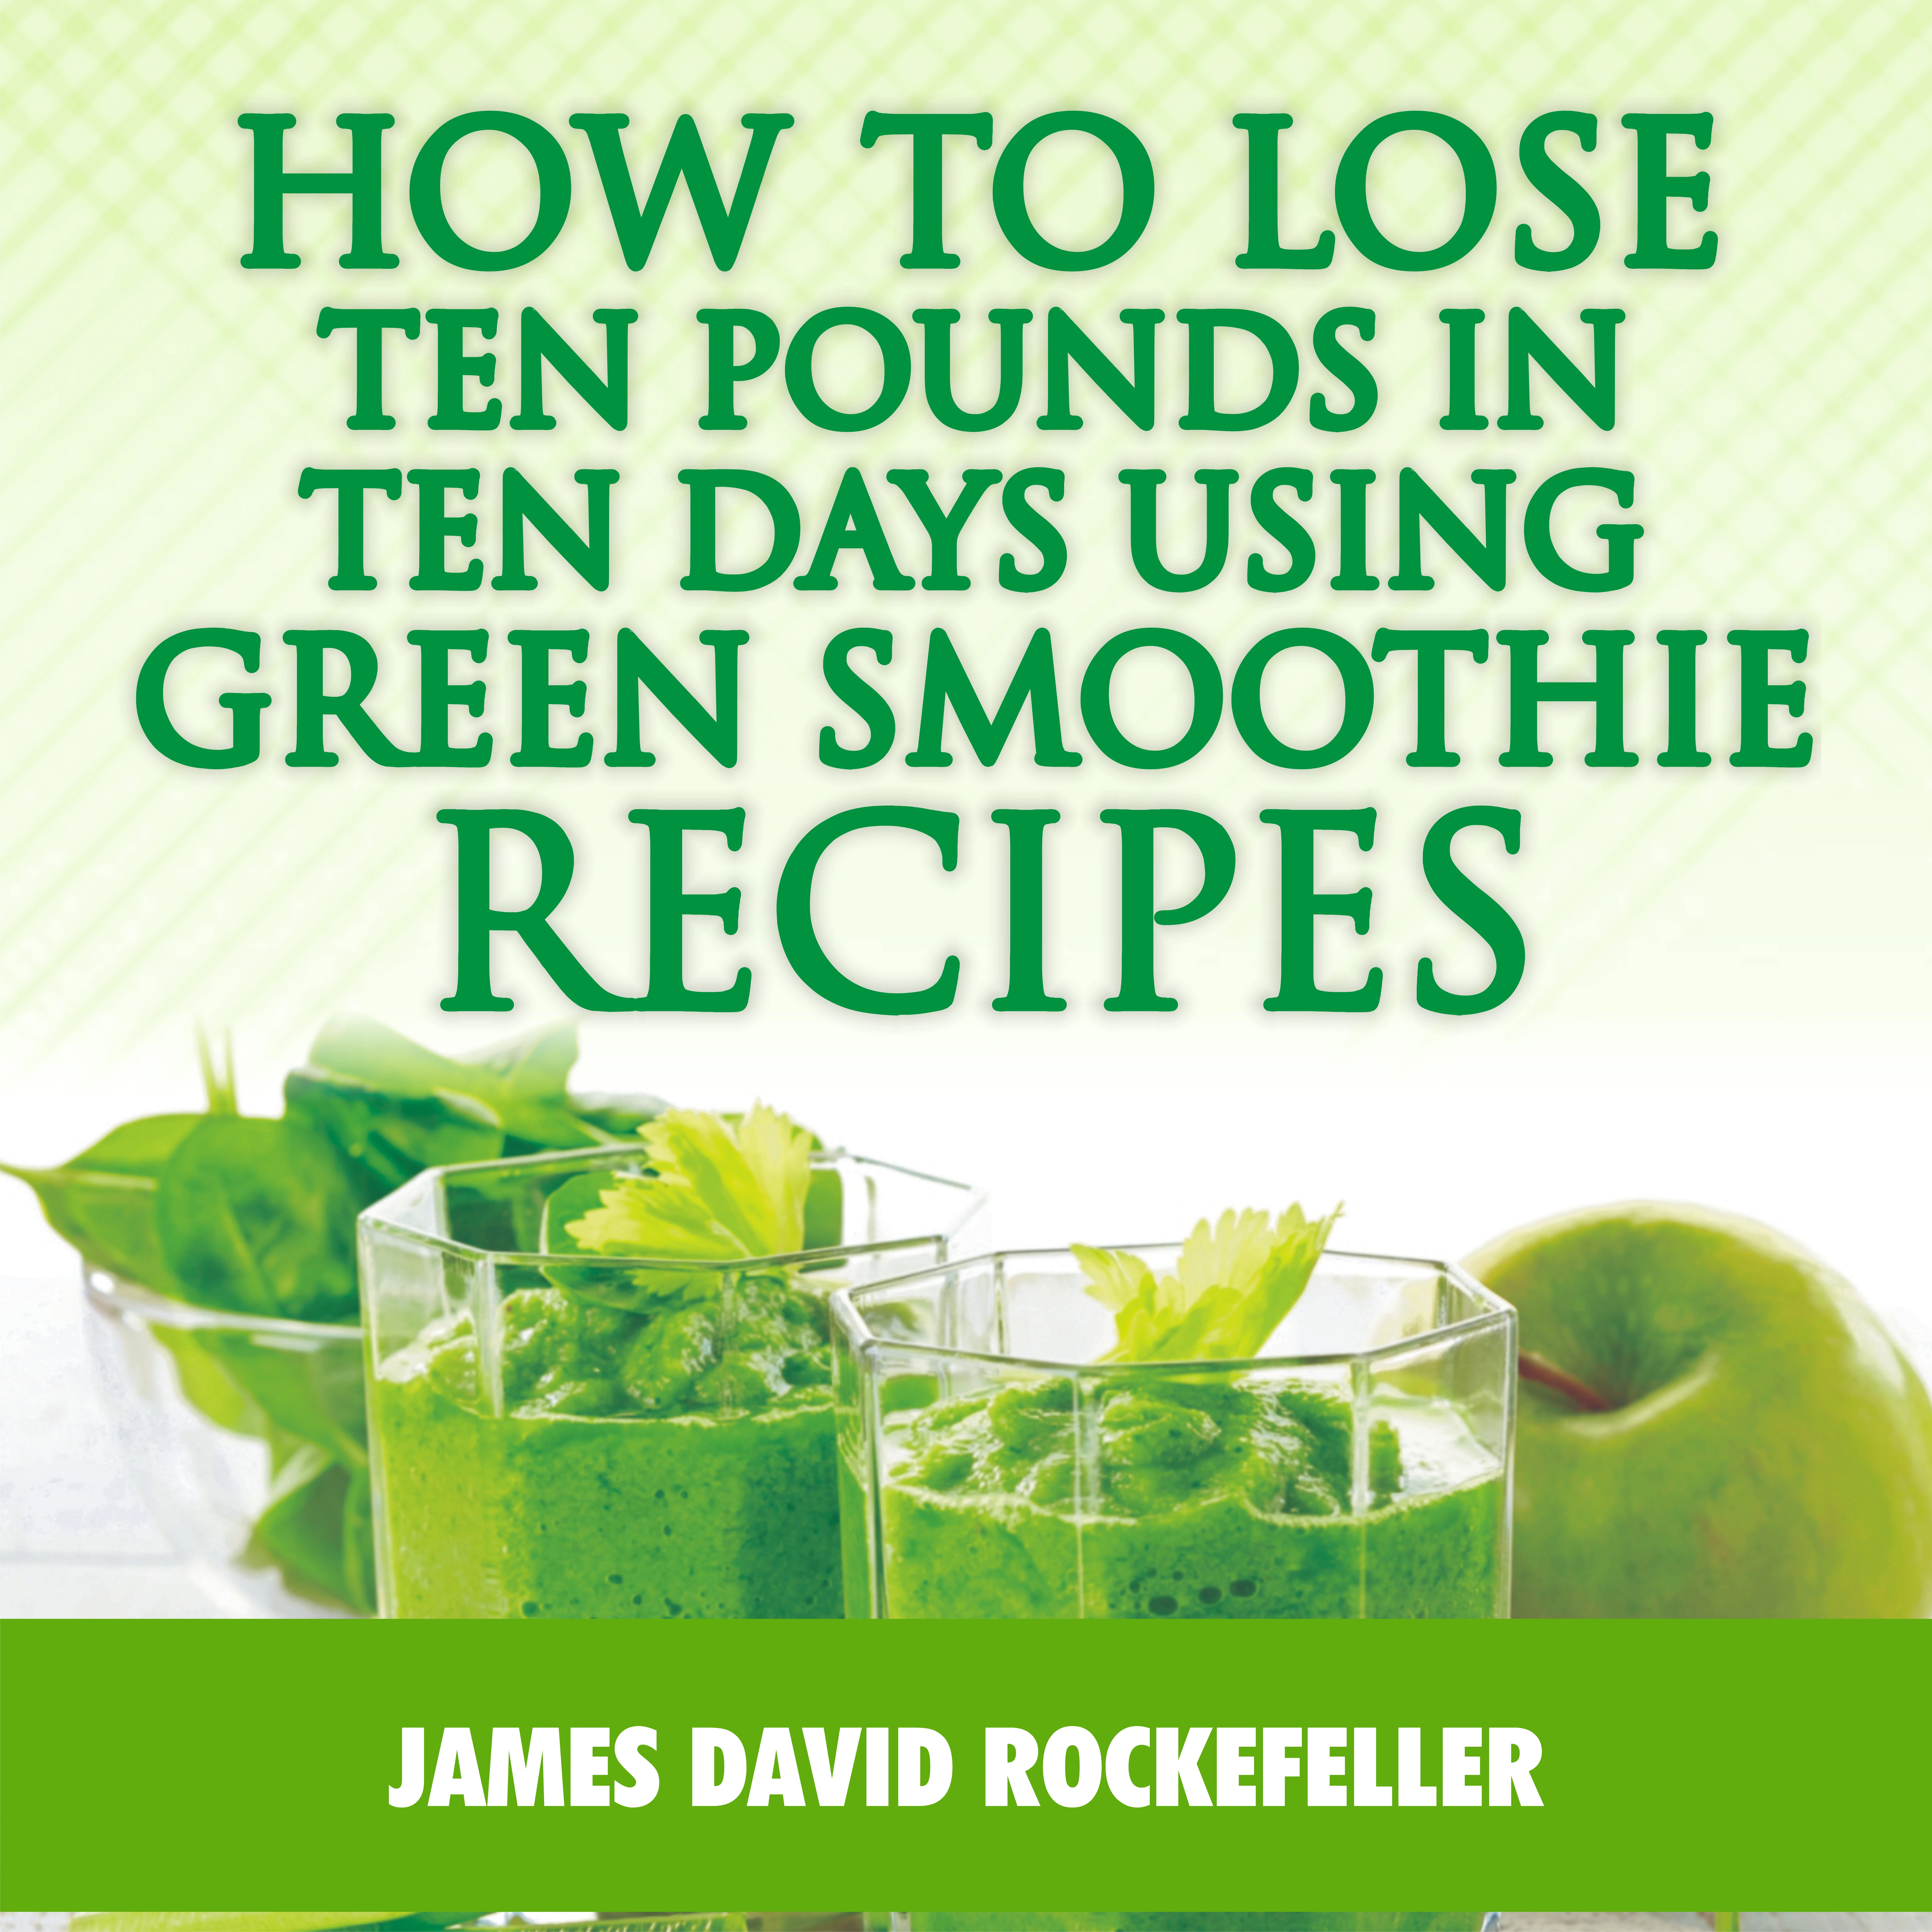 How to Lose Ten Pounds in Ten Days Using Green Smoothie Recipes Audiobook by James David Rockefeller